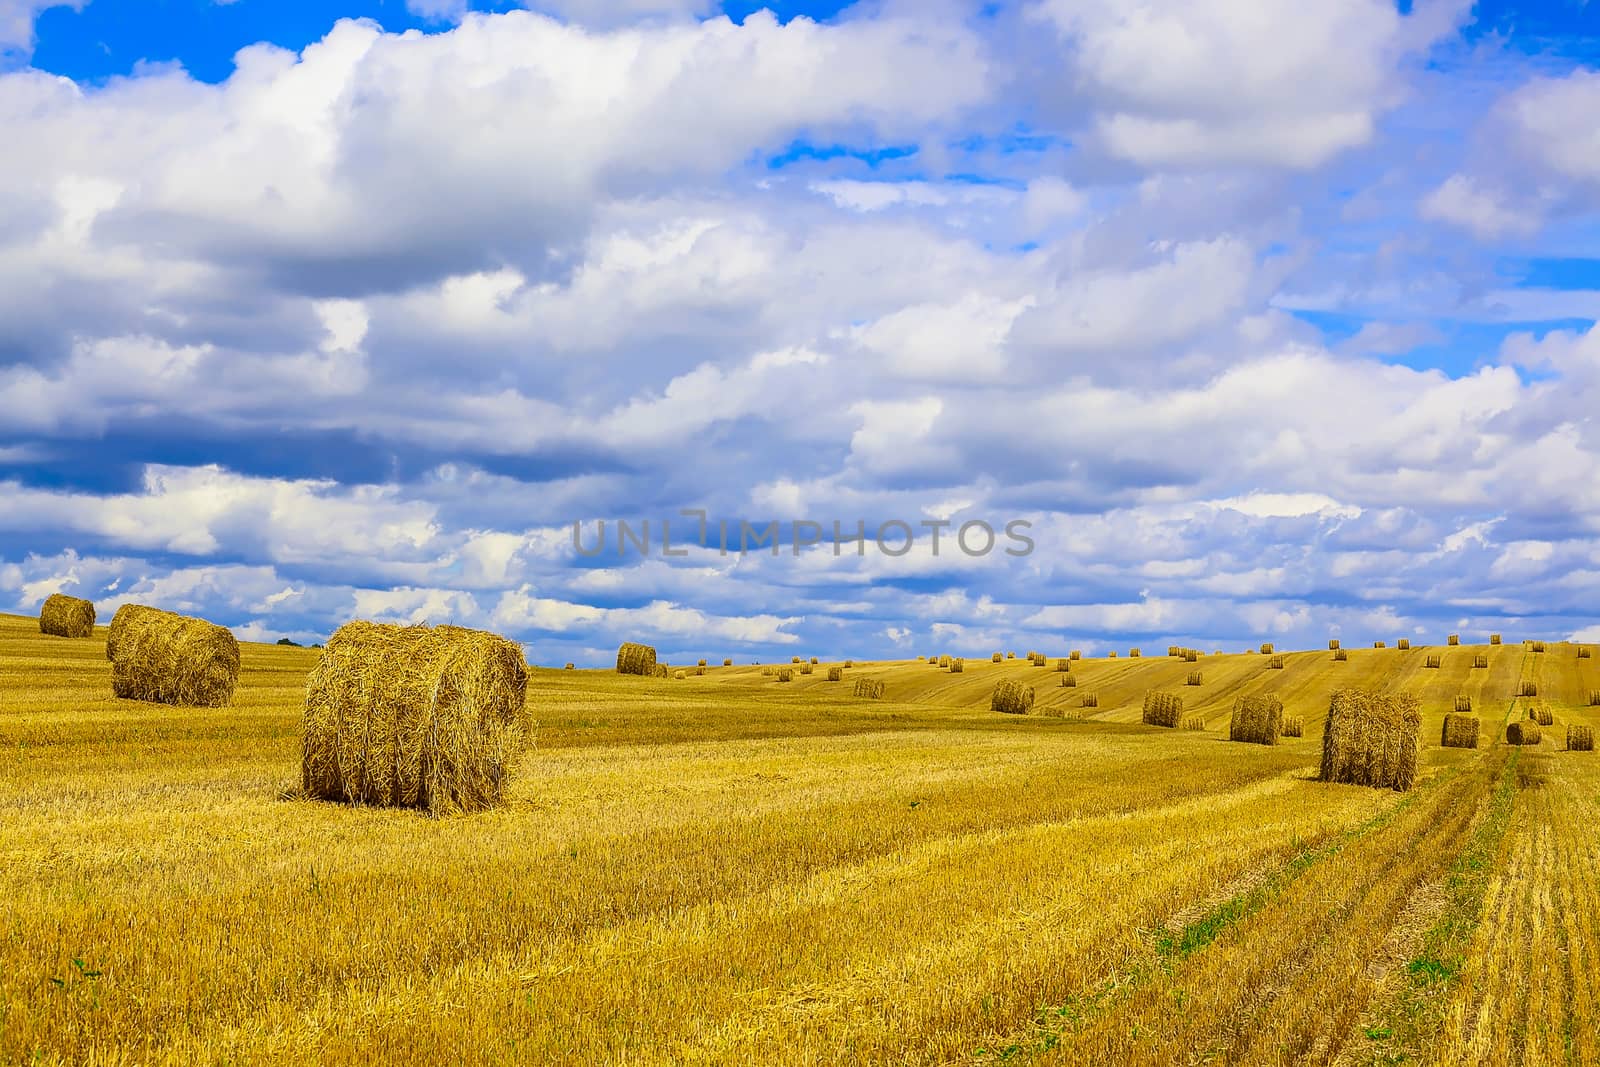 Yellow, Round Straw Bales in a  Field at end of Summer at Day with Blue Sky and Clouds after Harvest